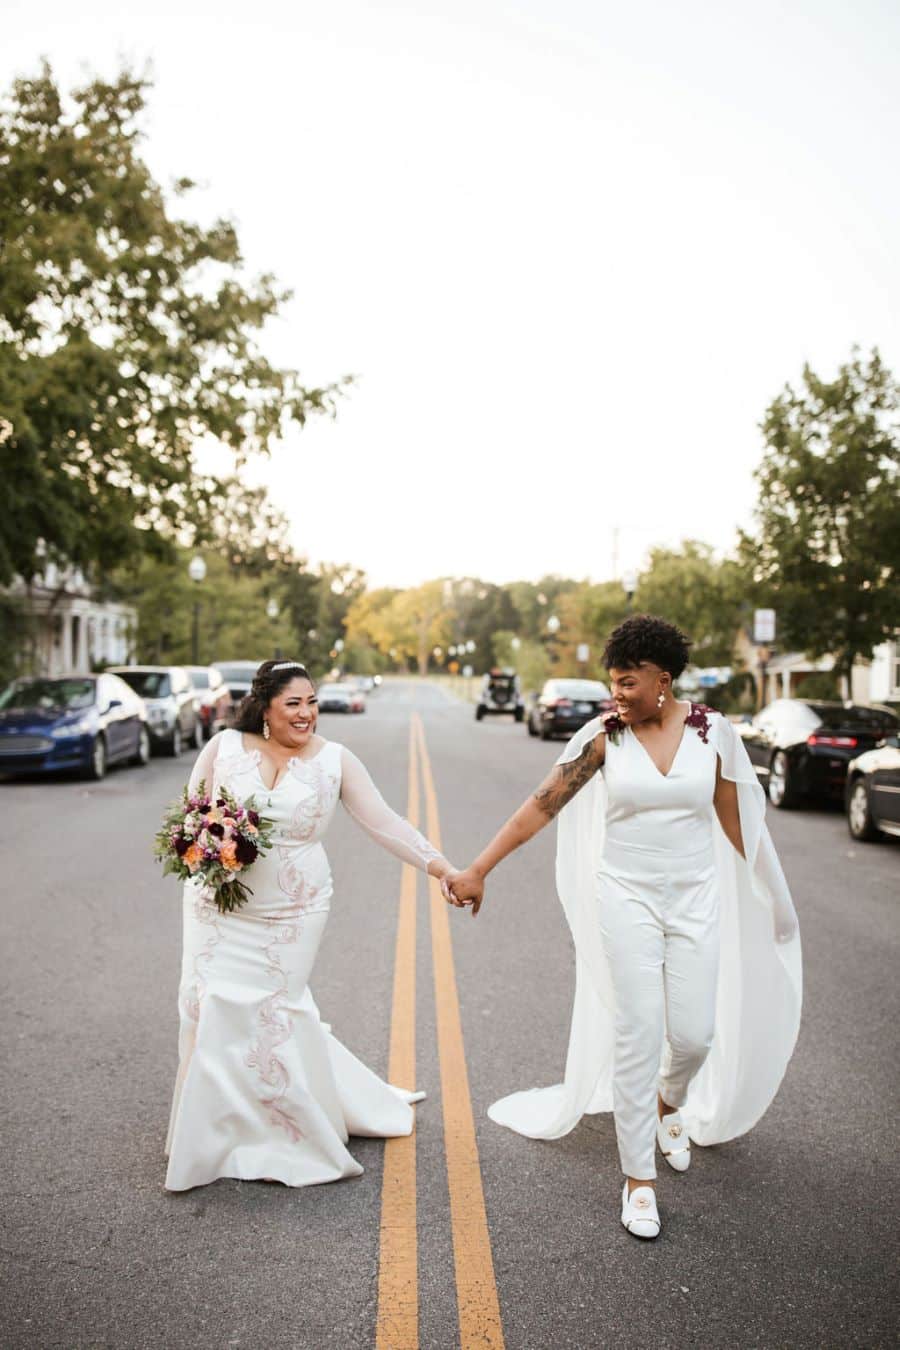 Brides holding hands in the middle of the street after being married / romantic lgbtq / fall / September / blush / burgundy